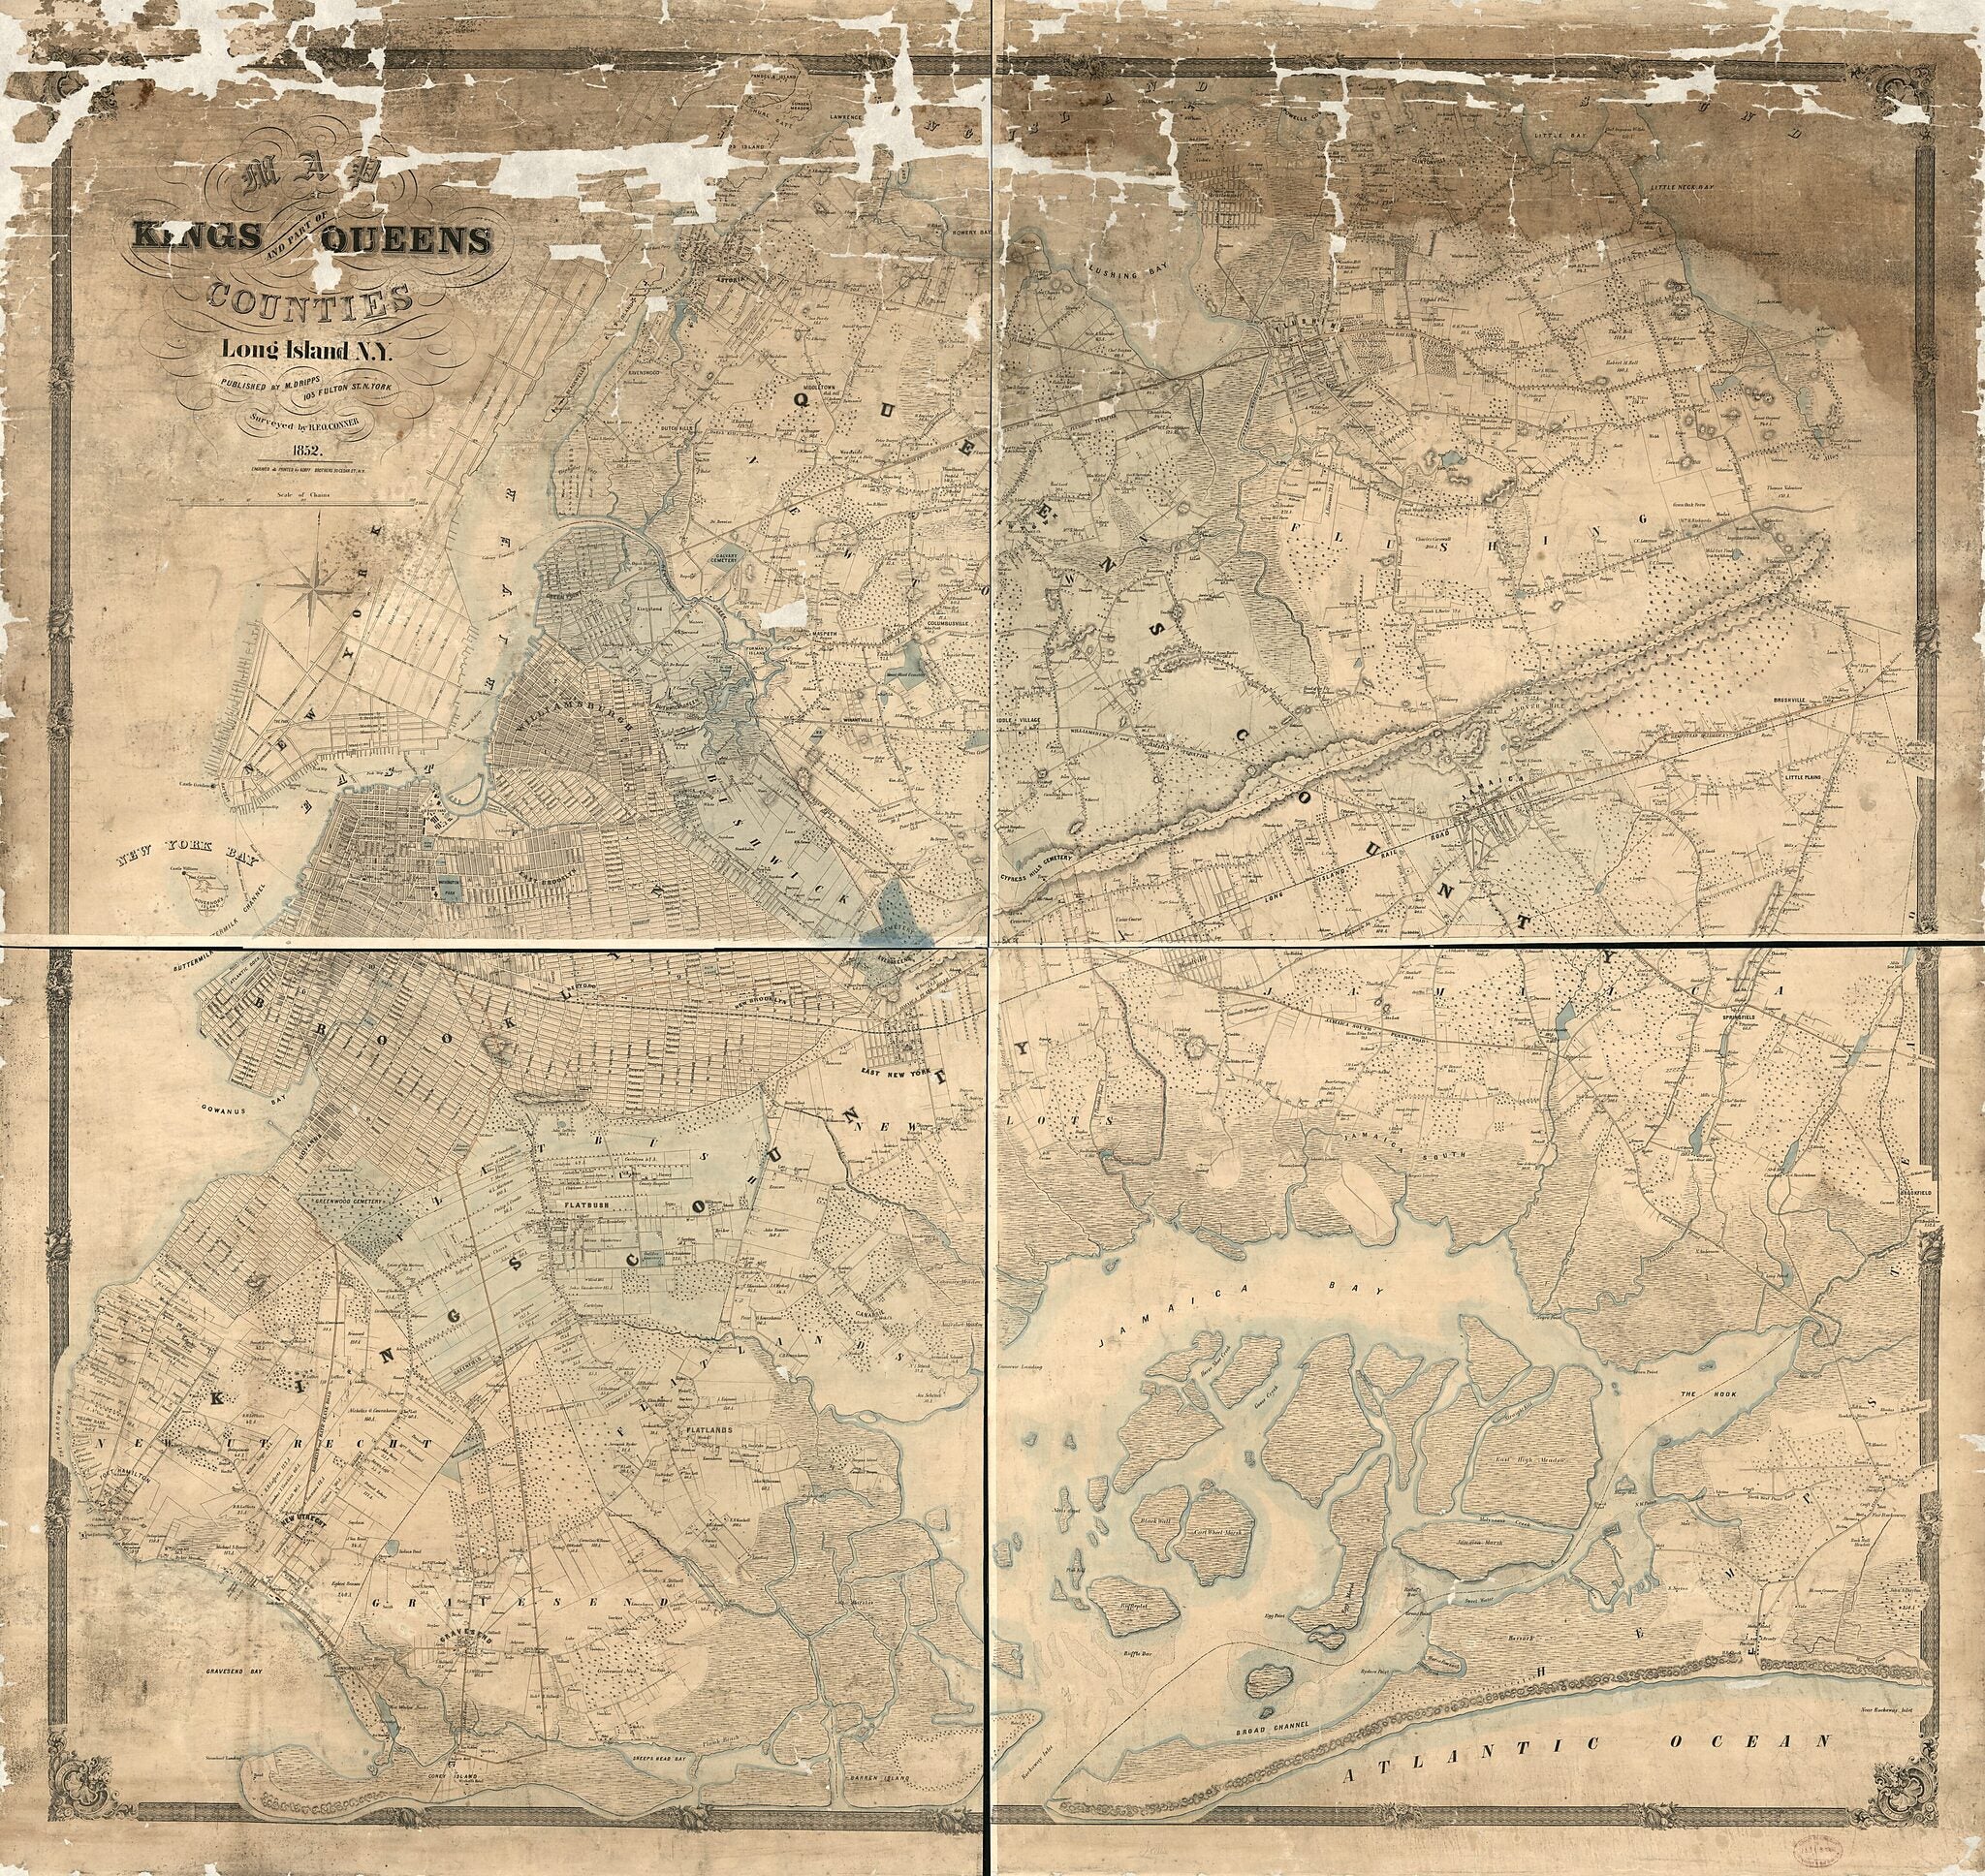 This old map of Map of Kings and Part of Queens Counties, Long Island New York from 1852 was created by R. F. O. Conner, M. (Matthew) Dripps,  Korff Brothers in 1852